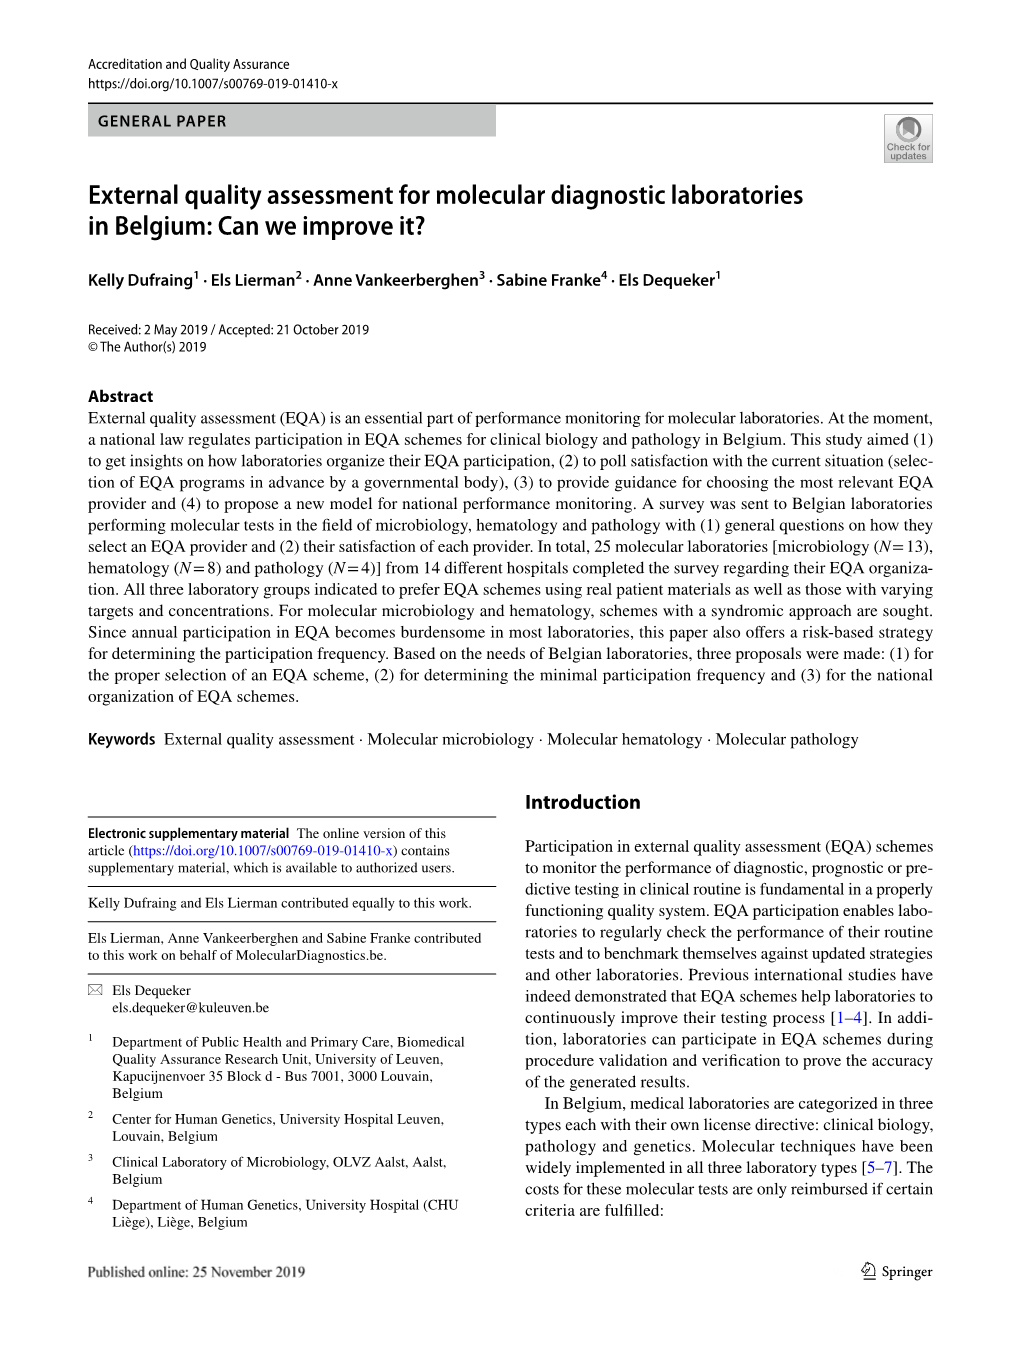 External Quality Assessment for Molecular Diagnostic Laboratories in Belgium: Can We Improve It?